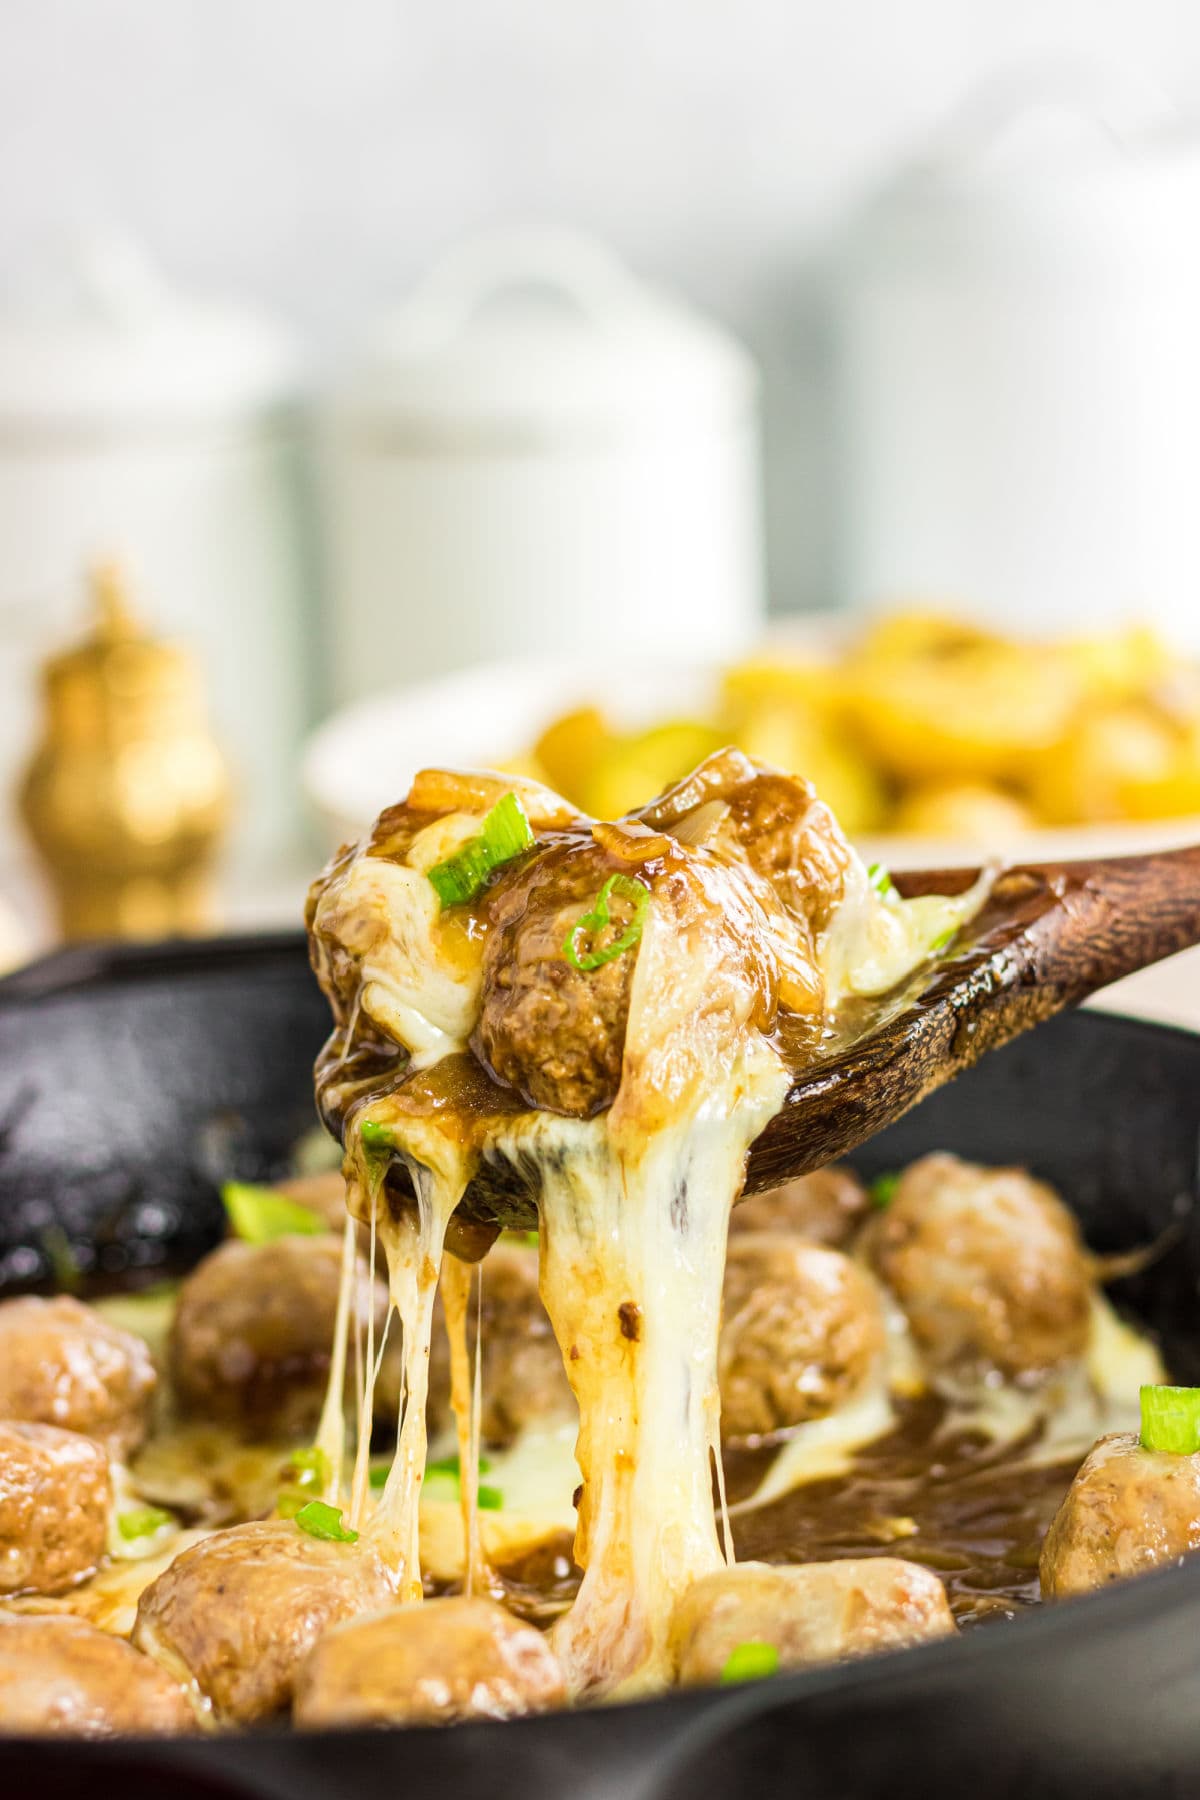 A wooden spoon removing the meatballs from the skillet with gooey cheese hanging off the spoon.